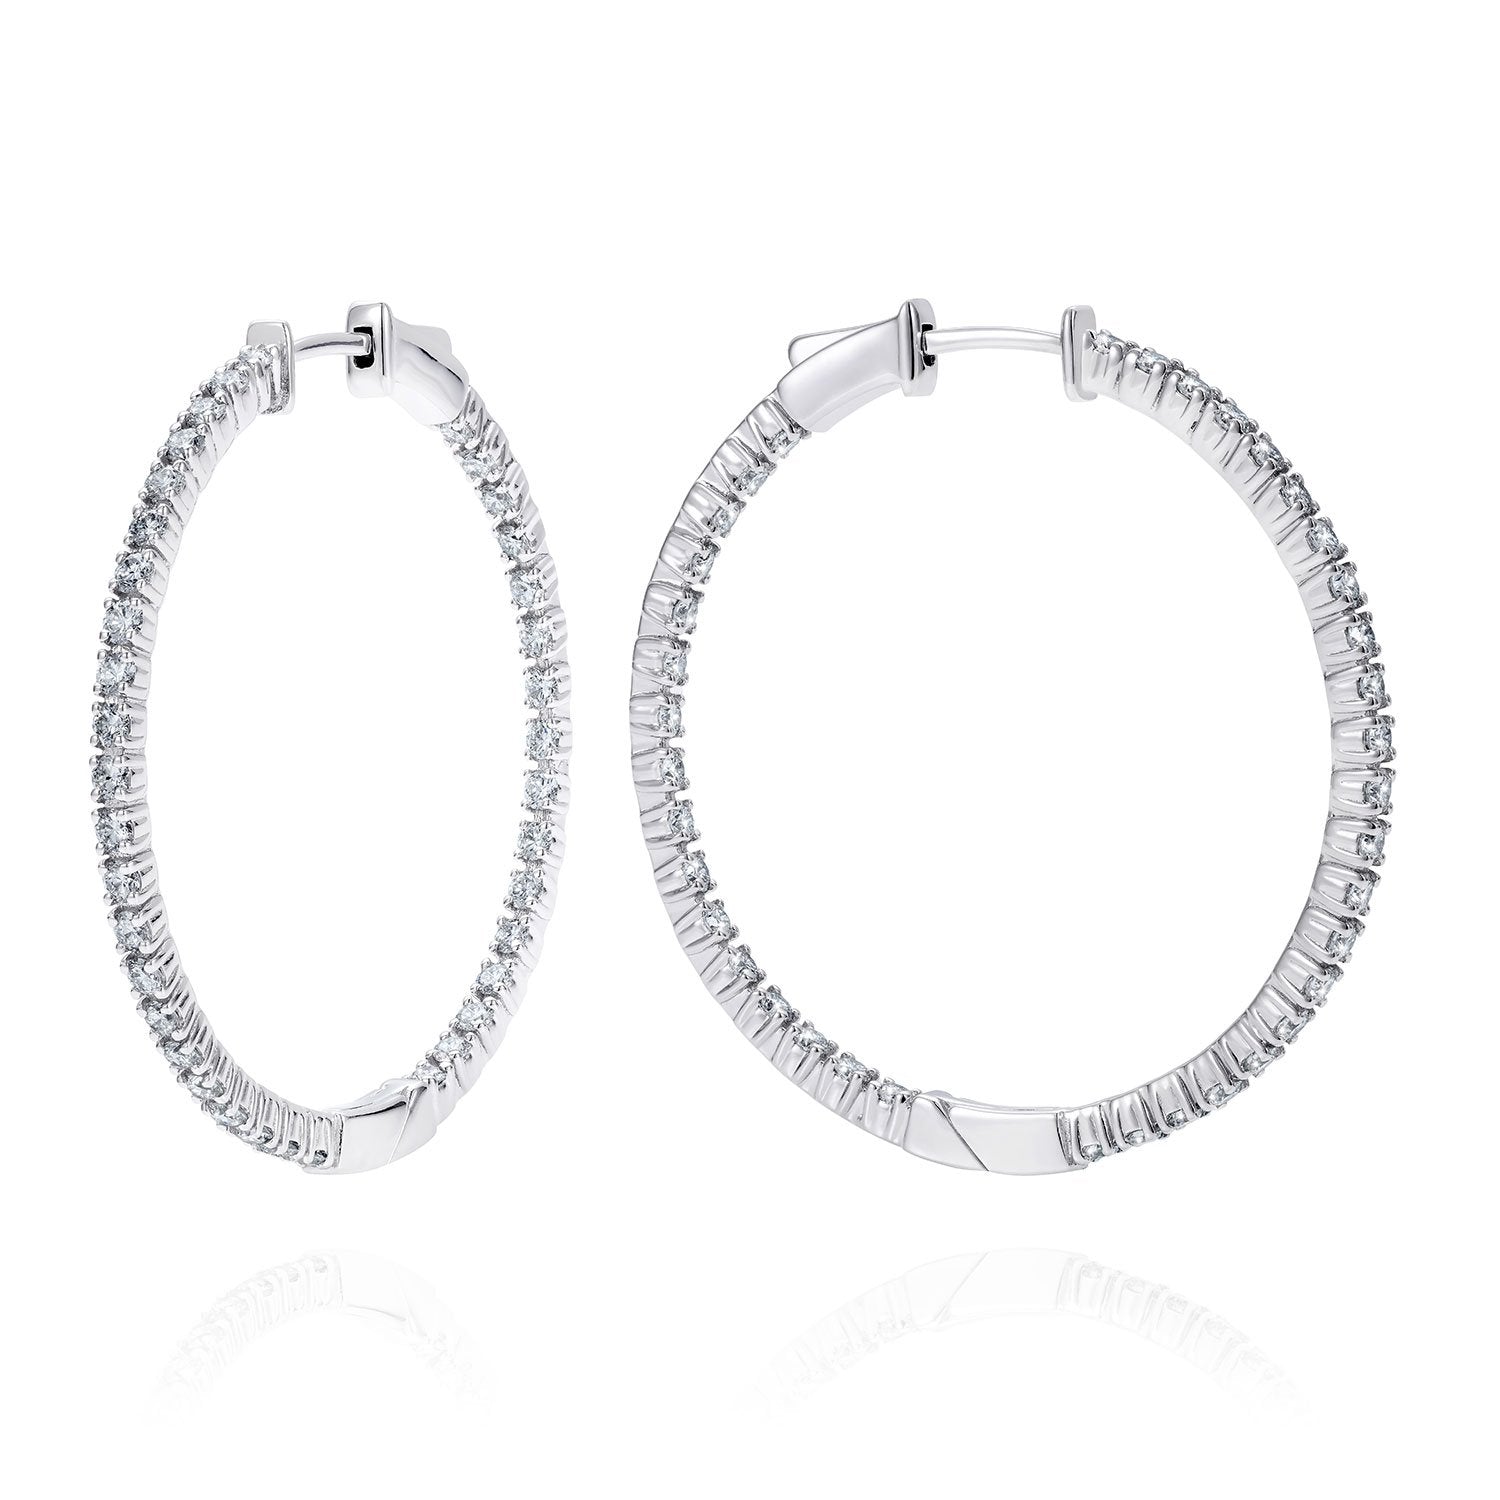 Devi Jewels embraces history with modernity. This piece in particular blends the past and present in a beautiful play of dazzling diamonds lining both inside and outside of the hoop. They are breathtaking from every angle elevating a feminine look with pure radiance.